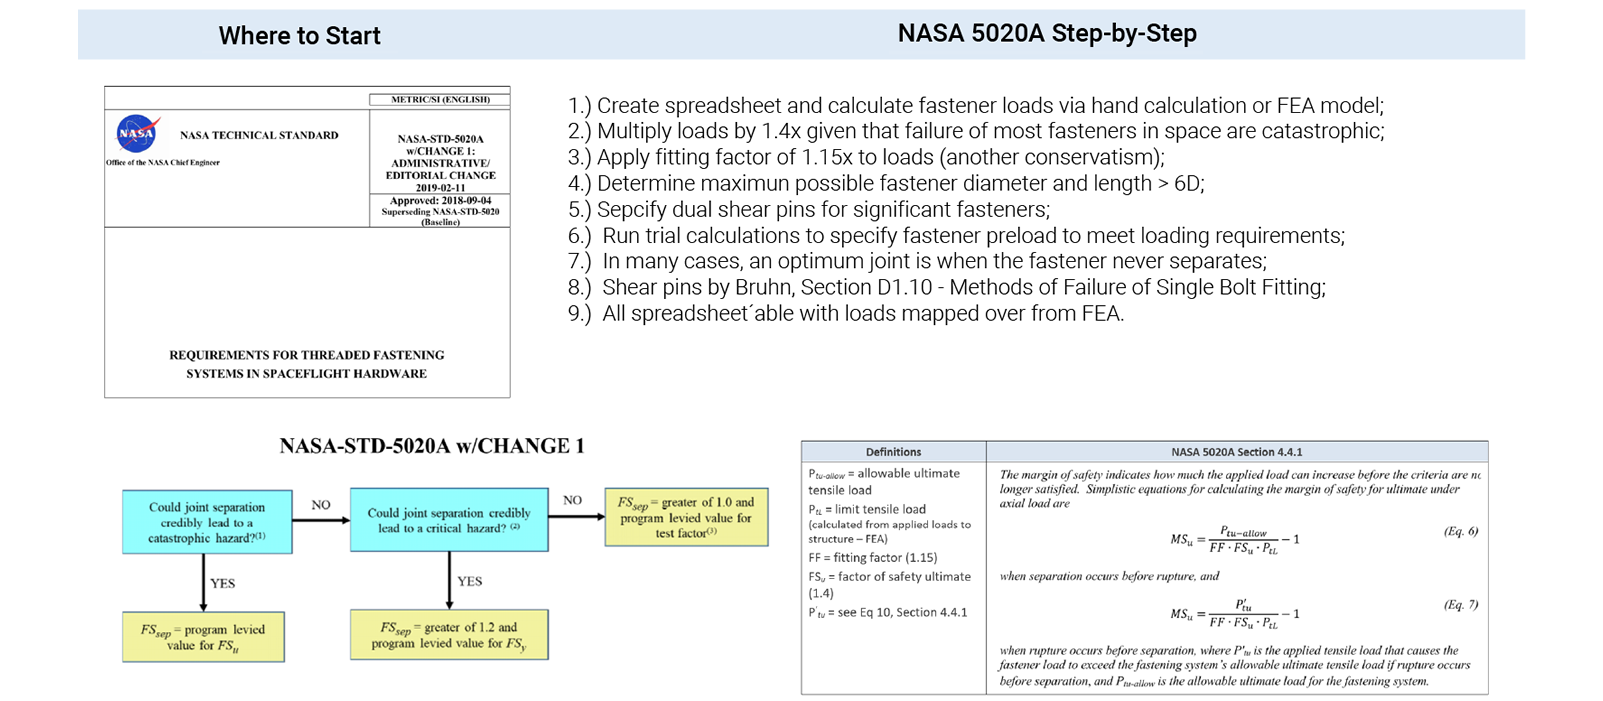 Summary of NASA 5020A - There is no Simple Path just Hard Calcs - FEA Services